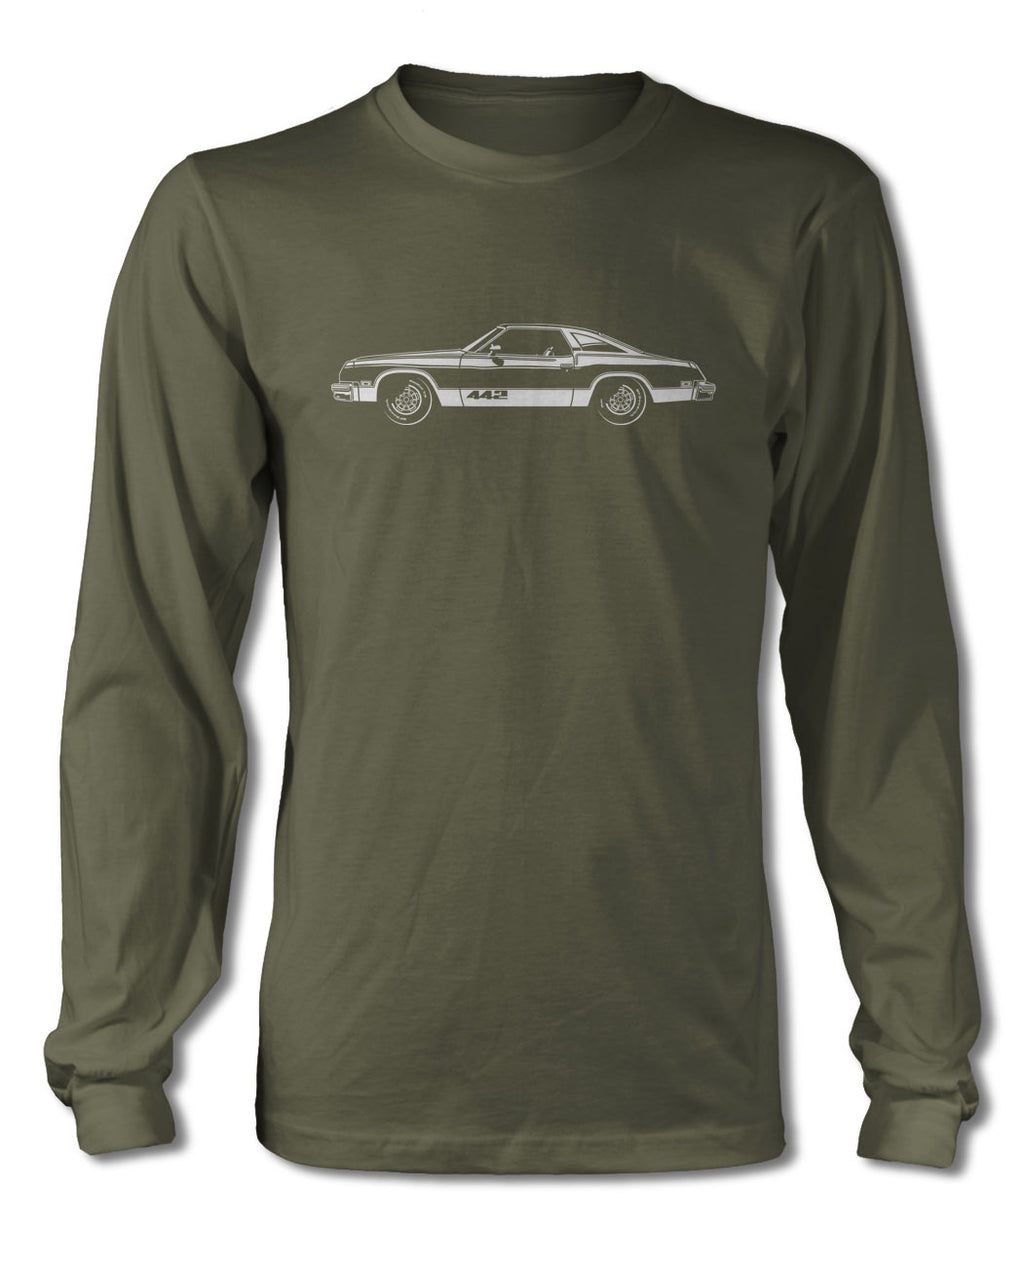 1977 Oldsmobile Cutlass 4-4-2 Coupe T-Shirt - Long Sleeves - Side View